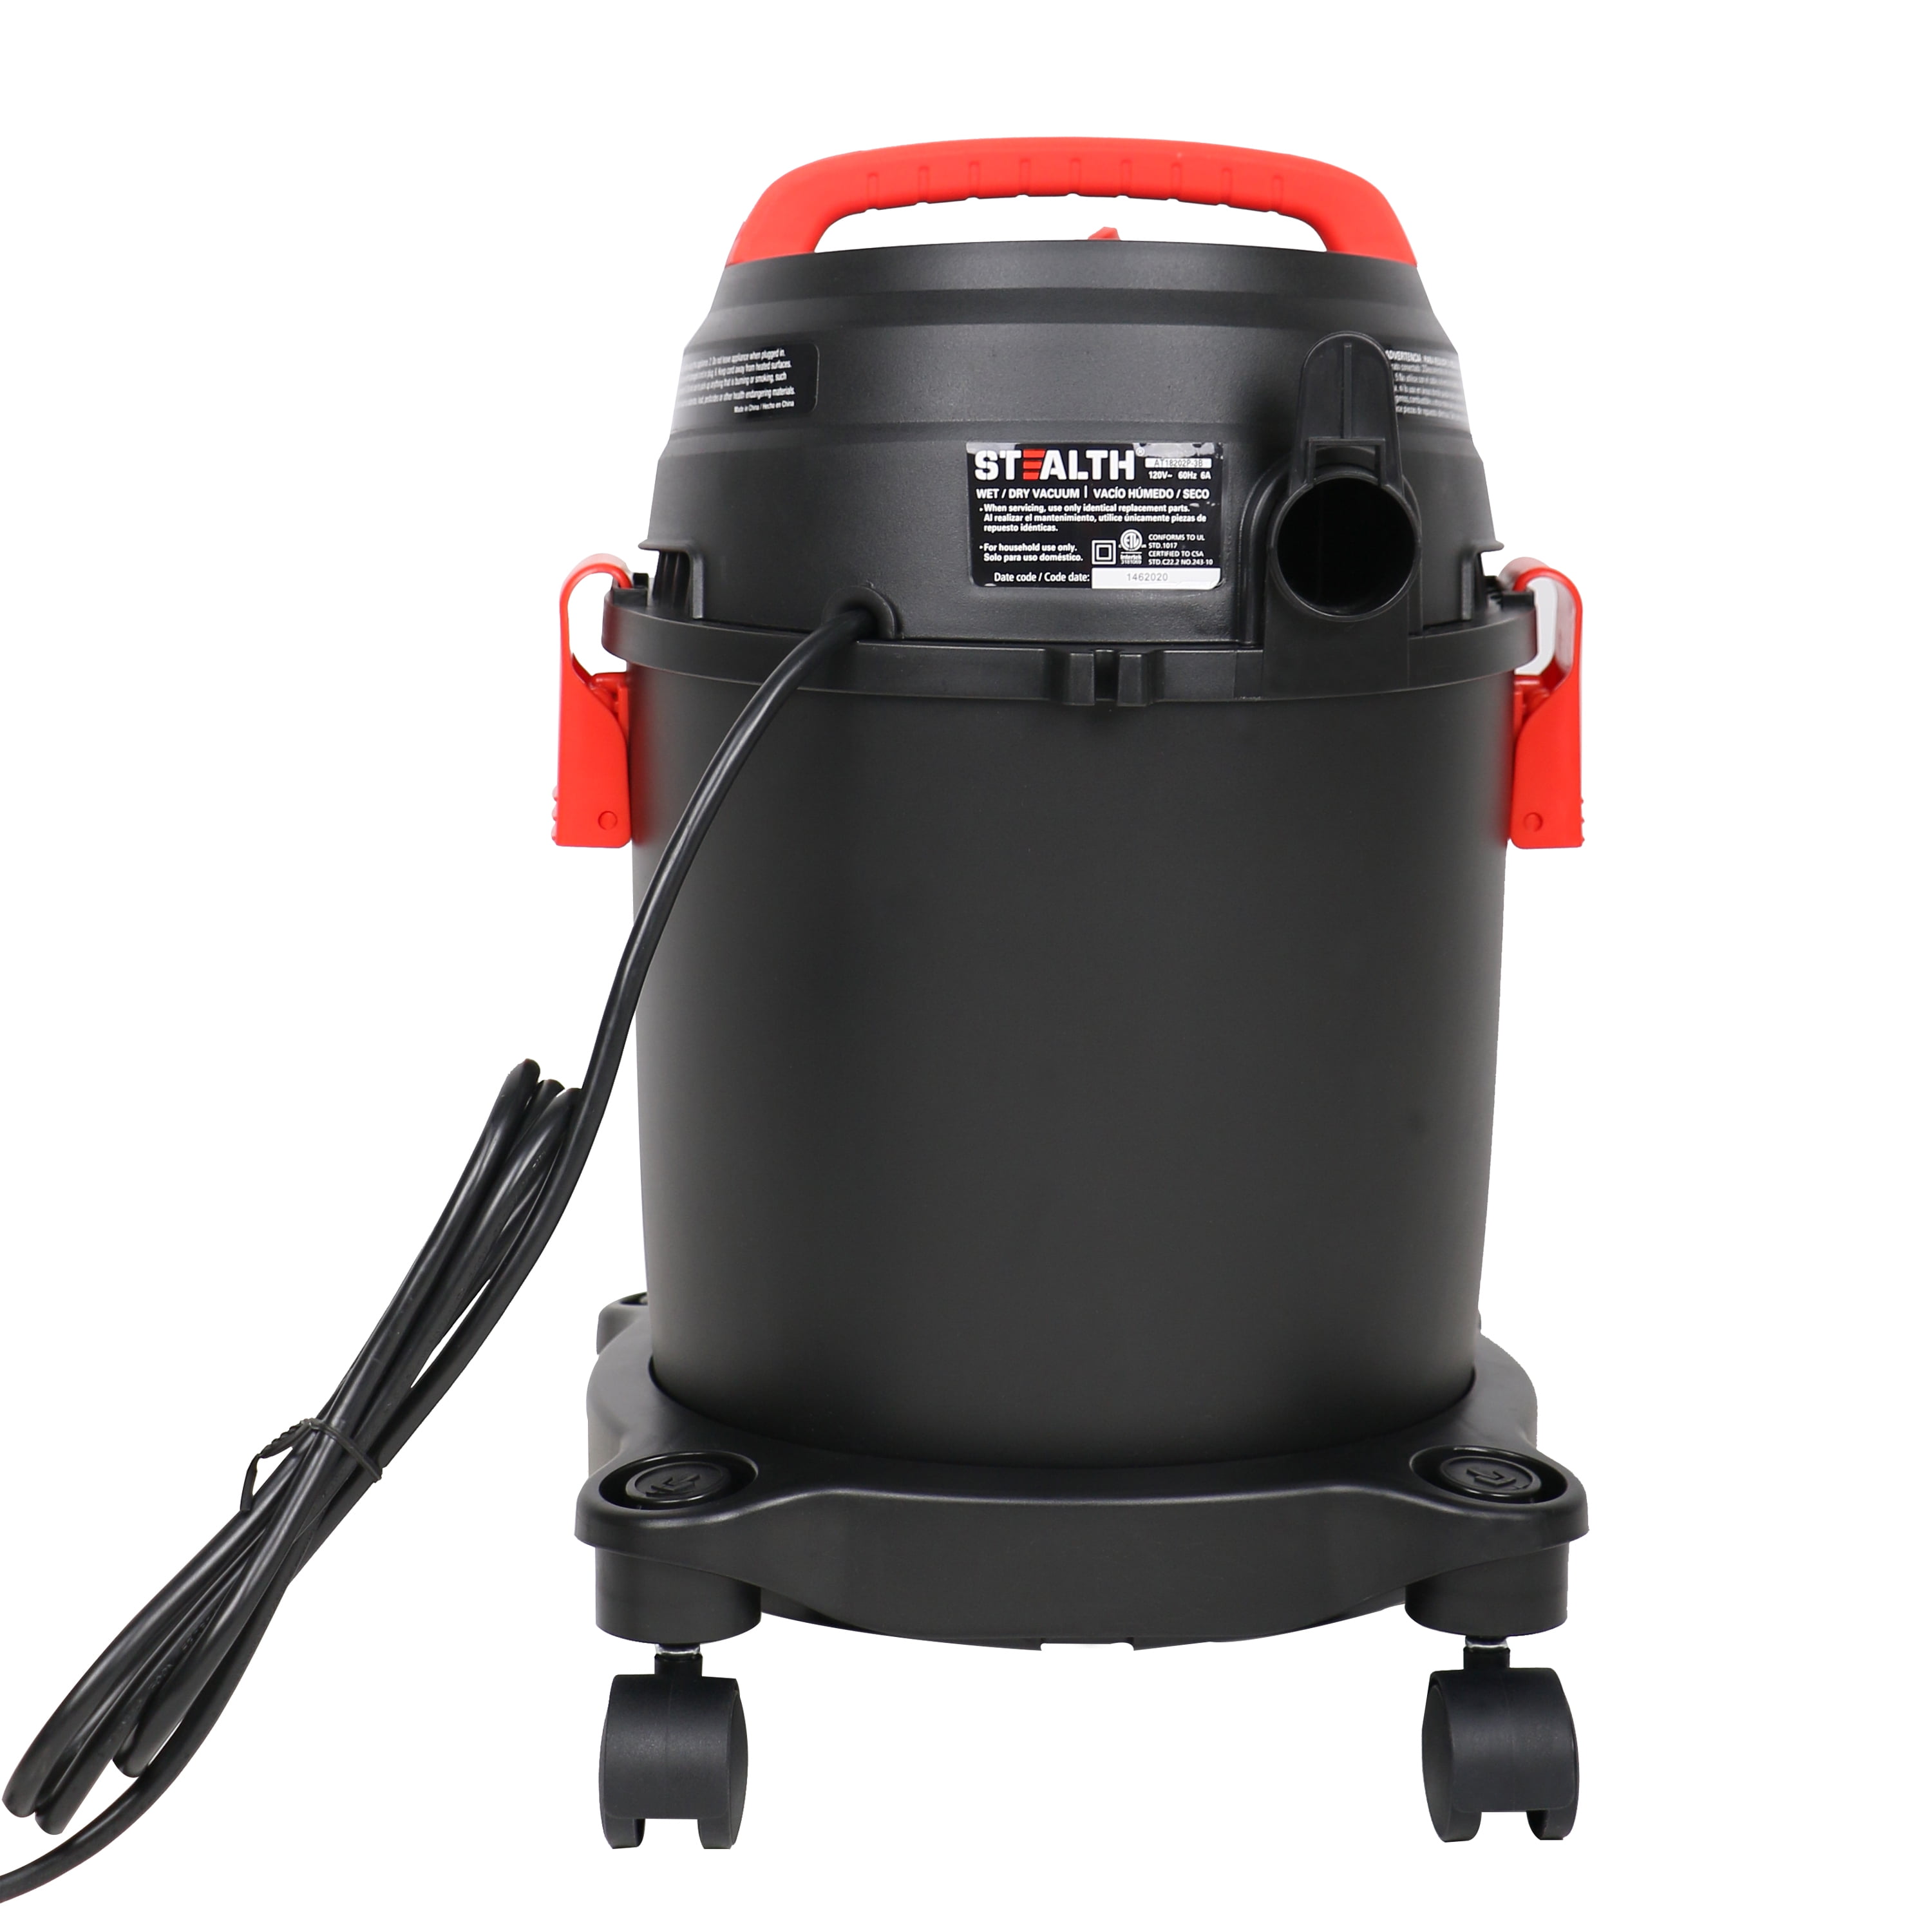 STEALTH 3 Gallon 3 Peak Horsepower Wet Dry Vacuum (AT18202P-3B) with Swiveling Casters 